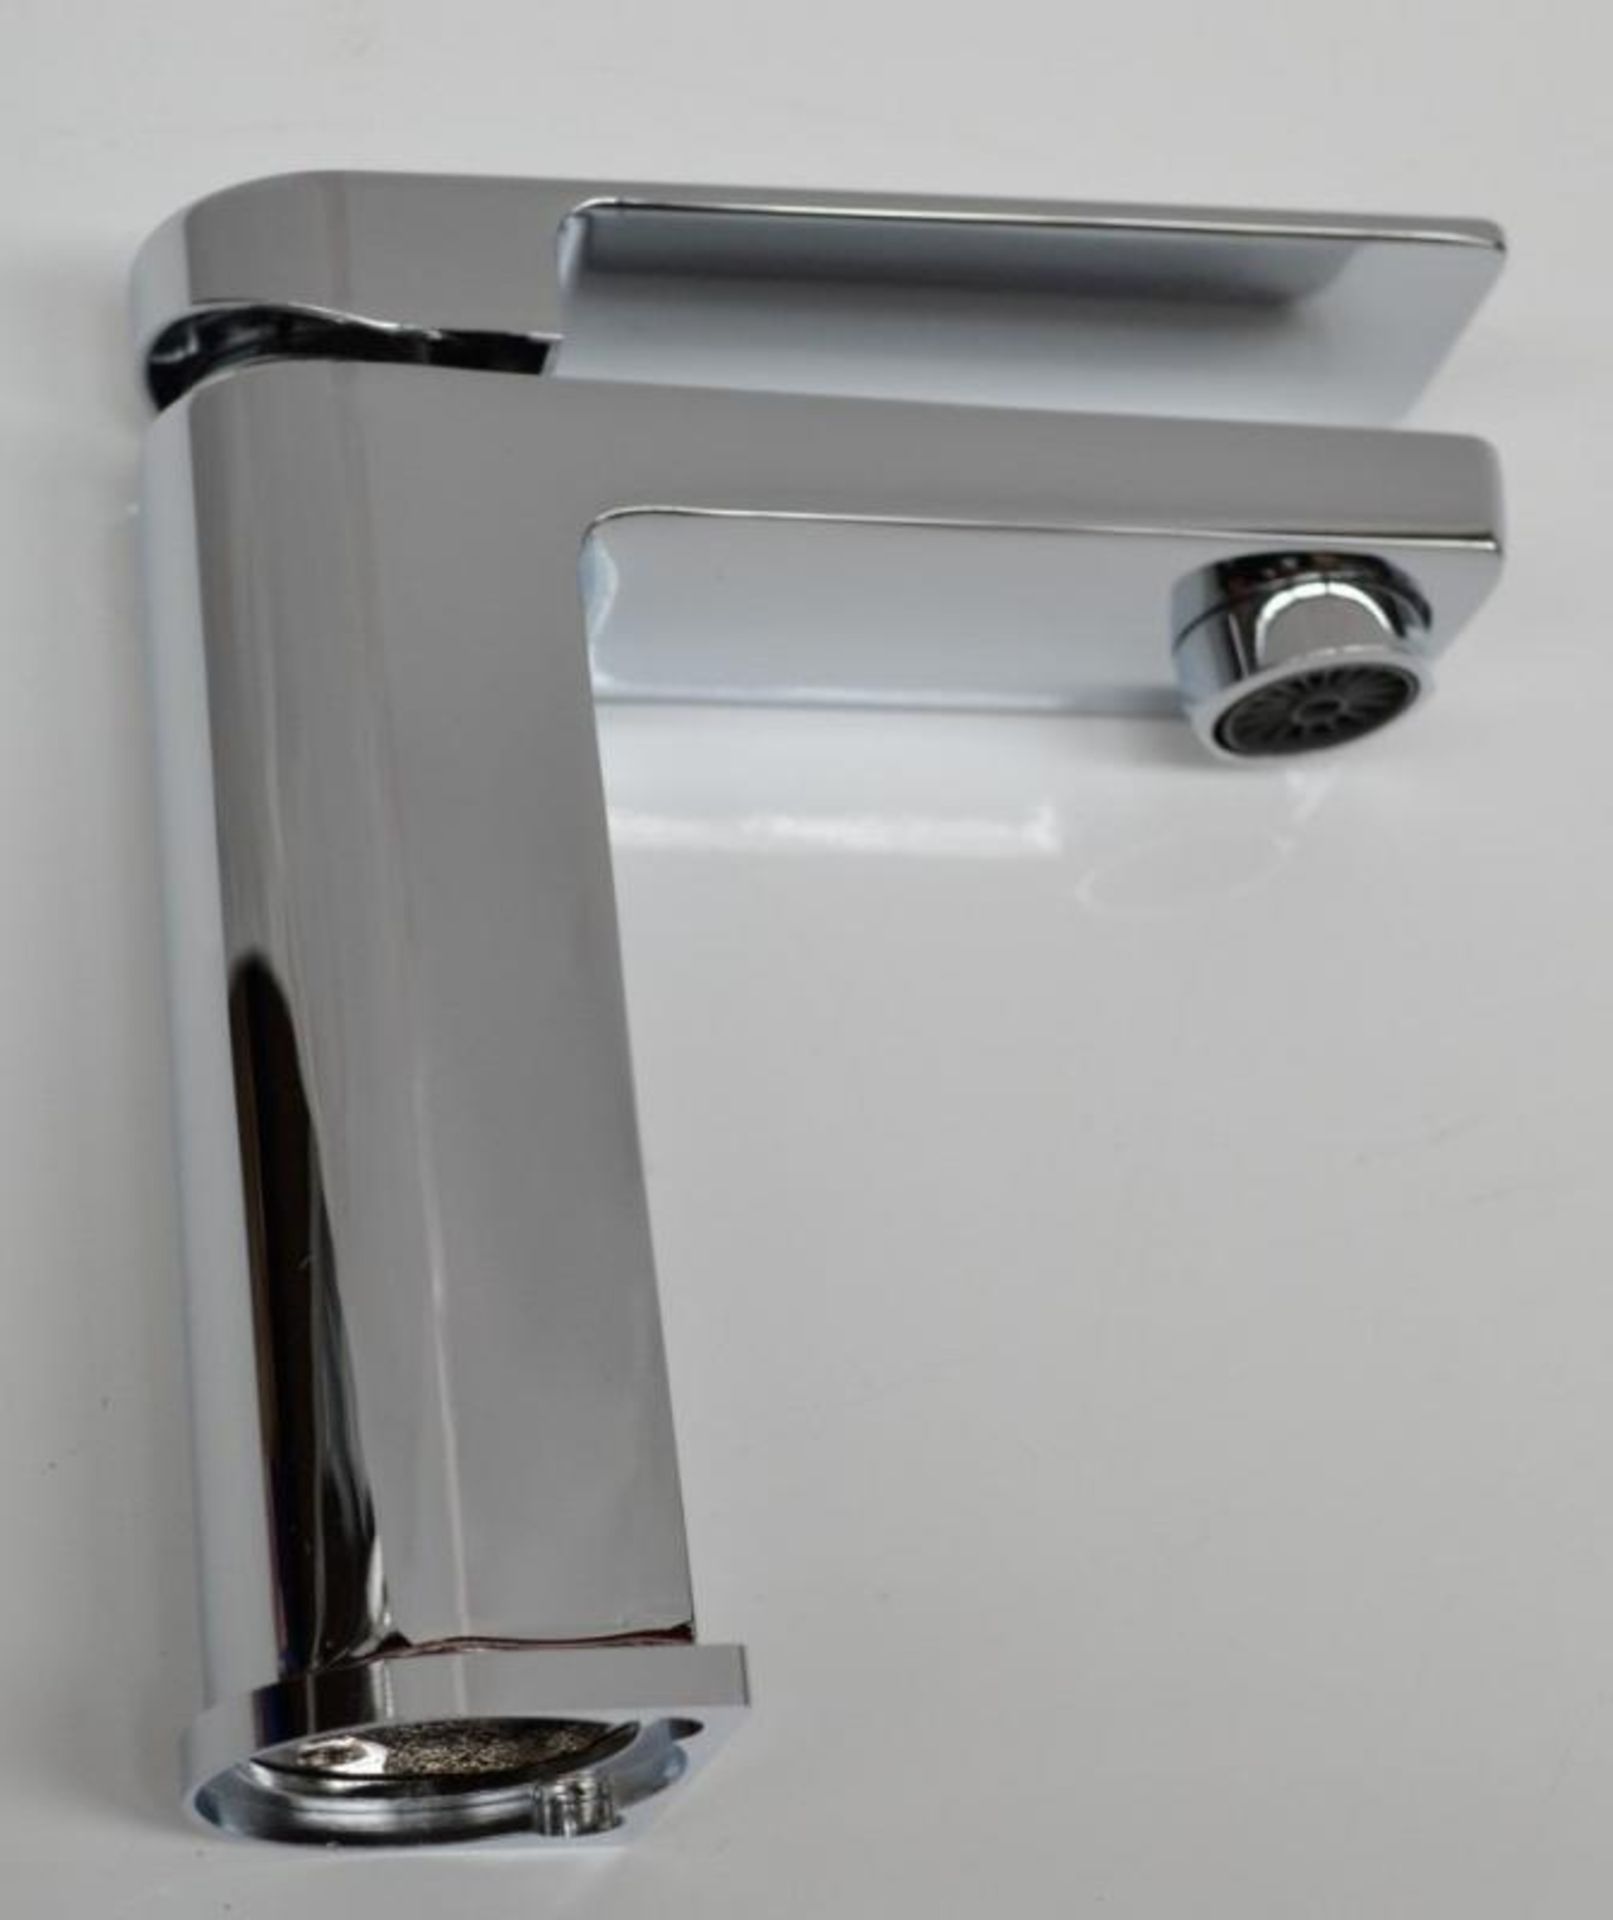 1 x Newport Basin Mixer (TAP124) - Ref: MBI023 - CL190 - Made From Brass With Chrome Finish - Unused - Image 5 of 6